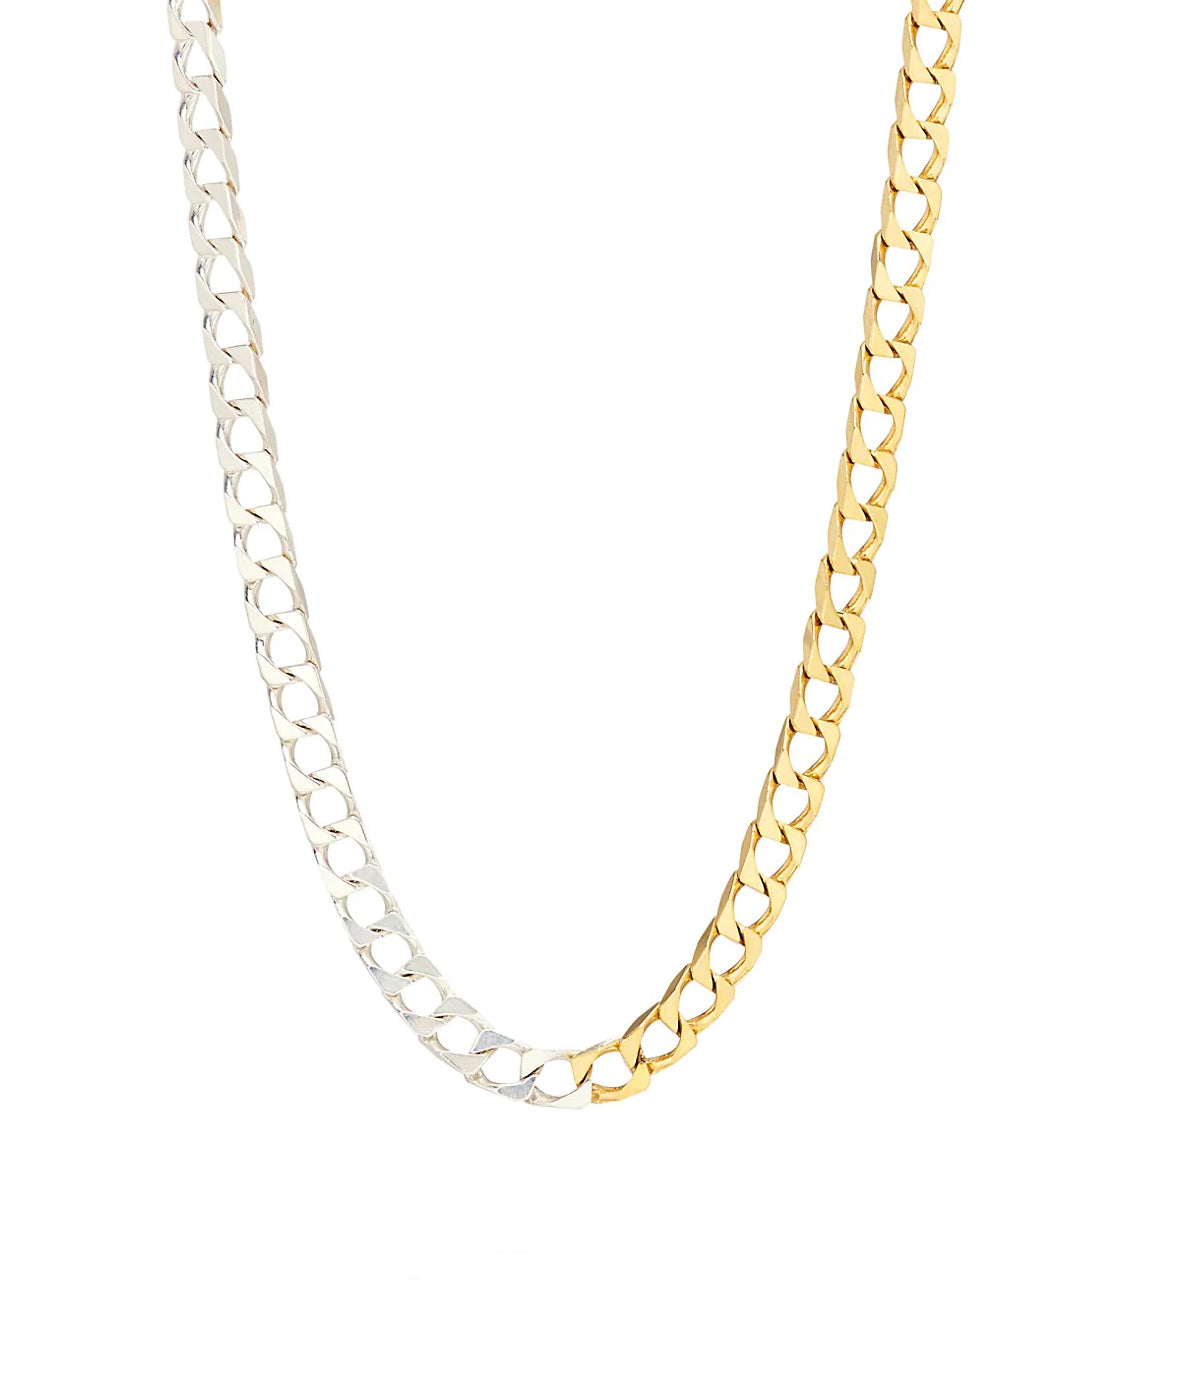 Bradley Necklace in Gold & Silver